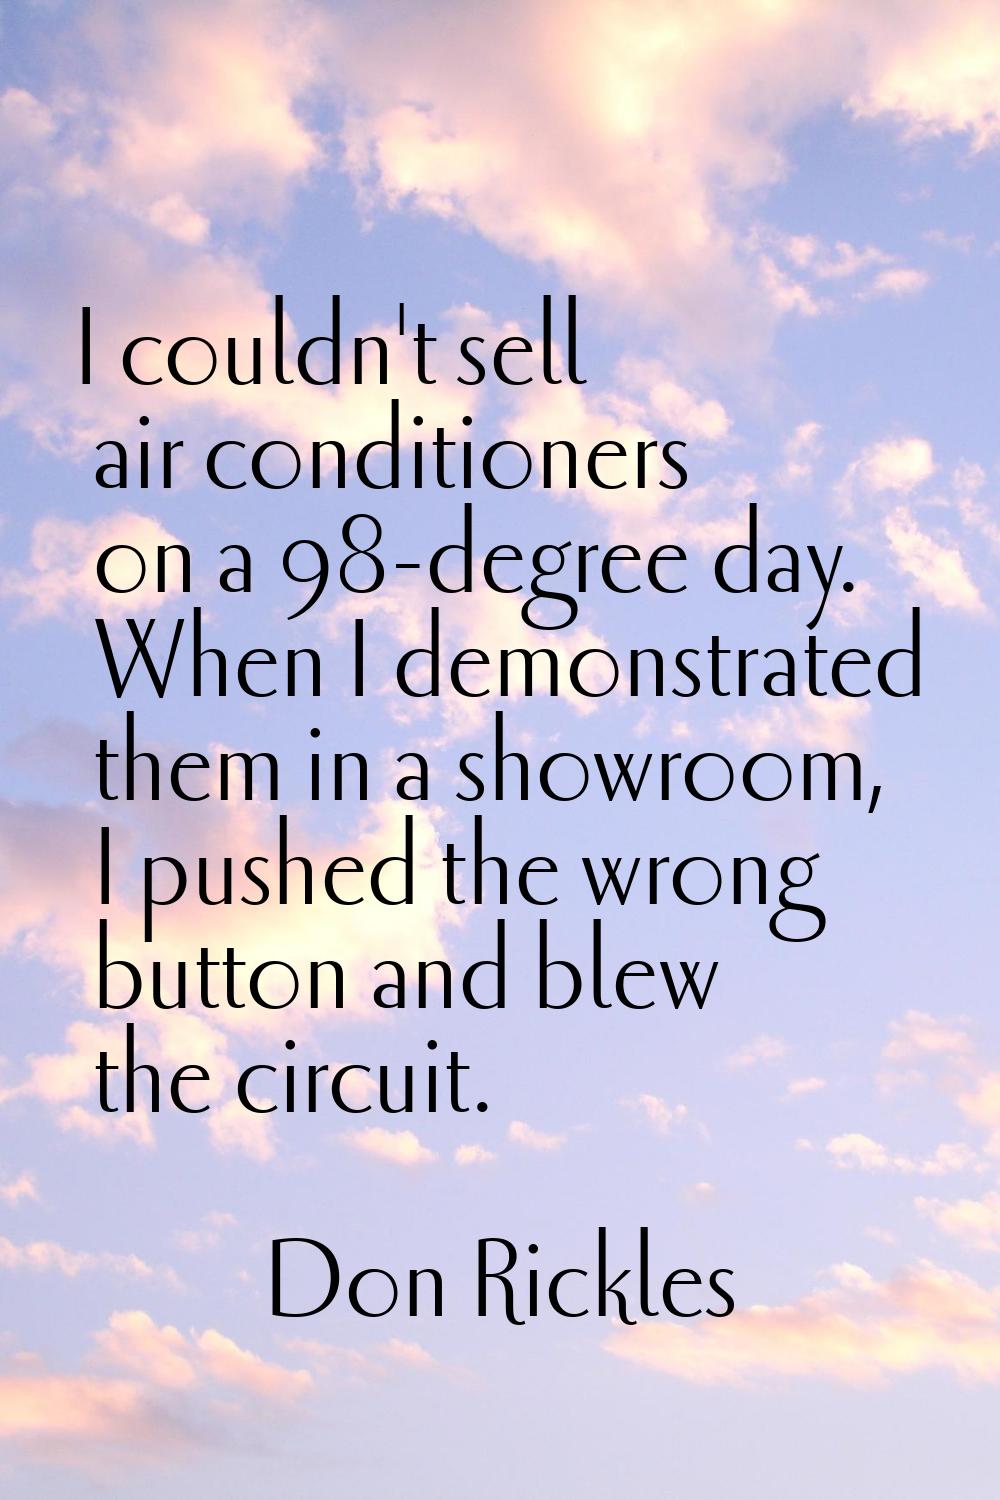 I couldn't sell air conditioners on a 98-degree day. When I demonstrated them in a showroom, I push